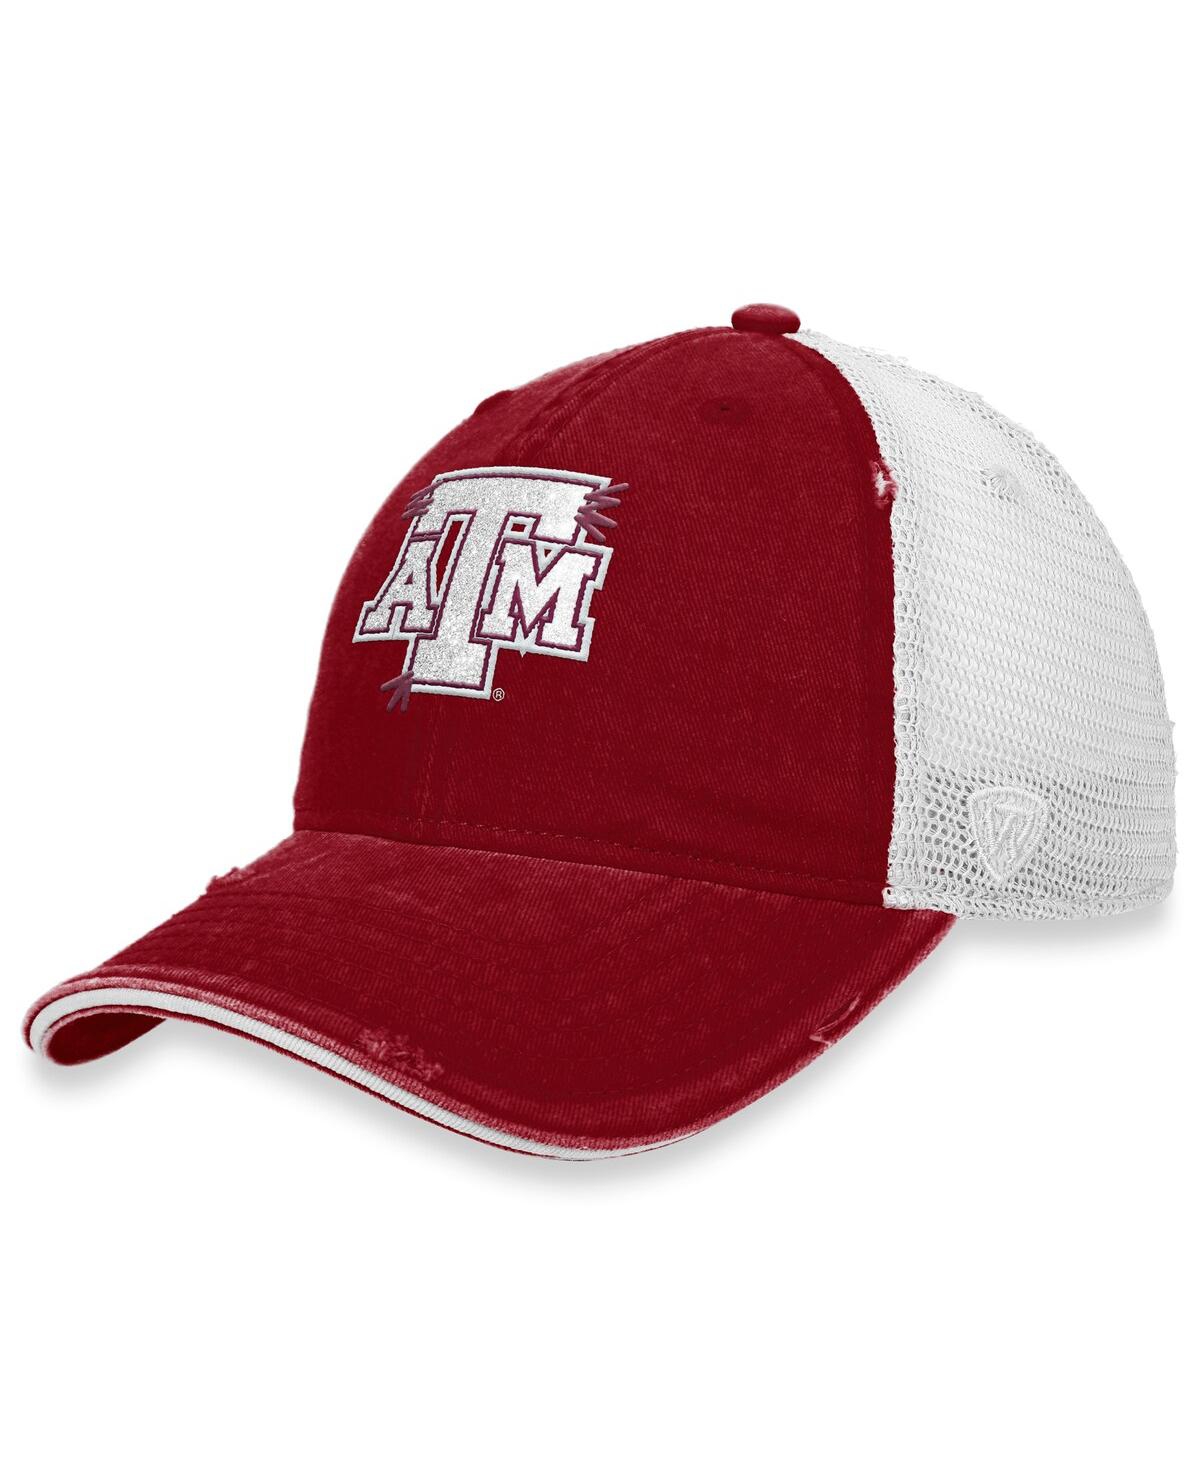 Women's Top of the World Maroon, White Texas A&M Aggies Radiant Trucker Snapback Hat - Maroon, White